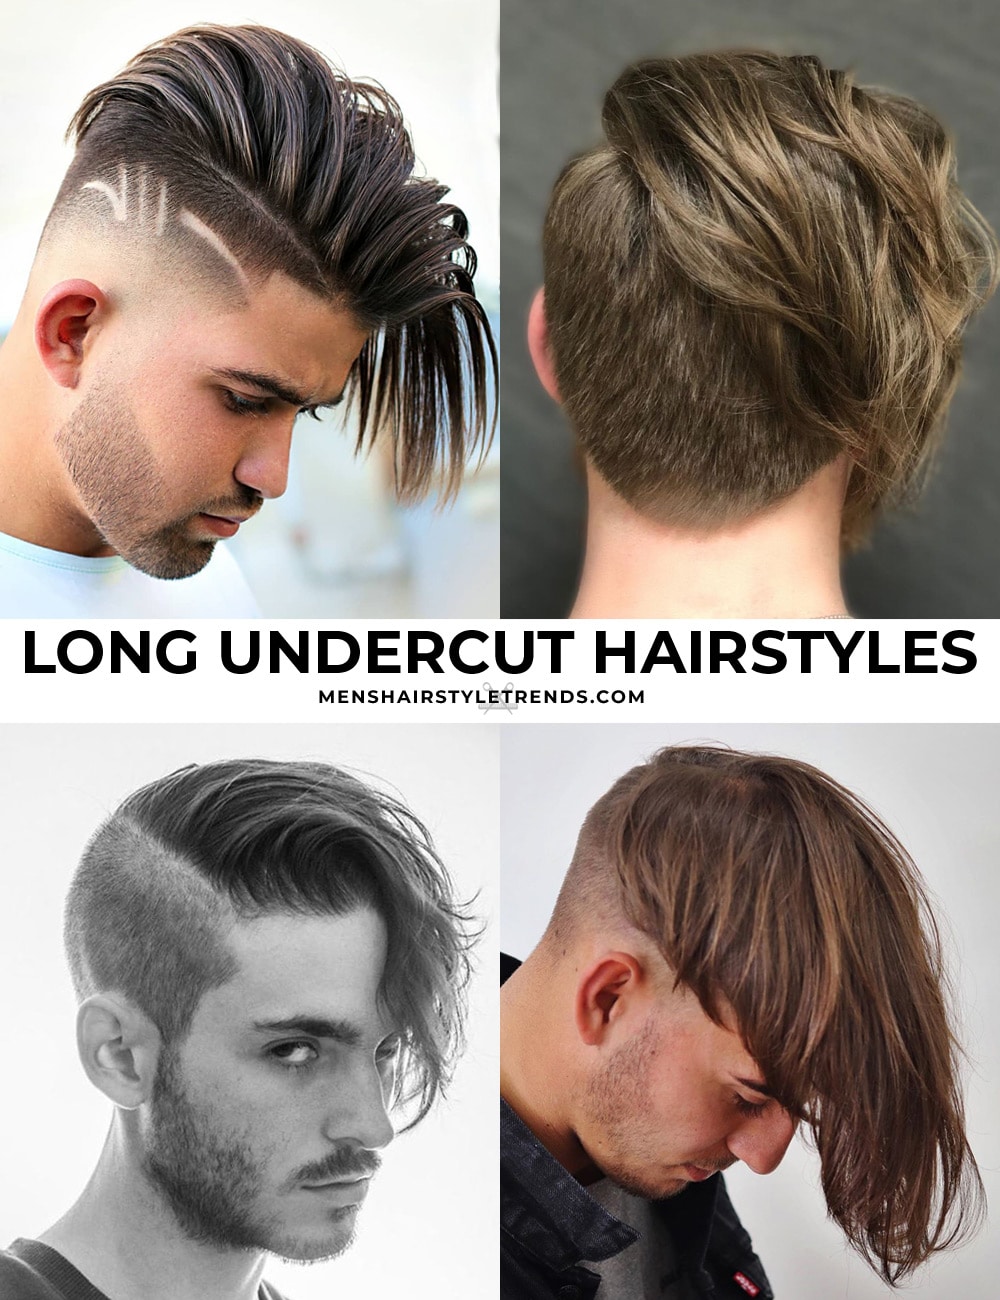 5 Cool Undercut Hairstyles For Men